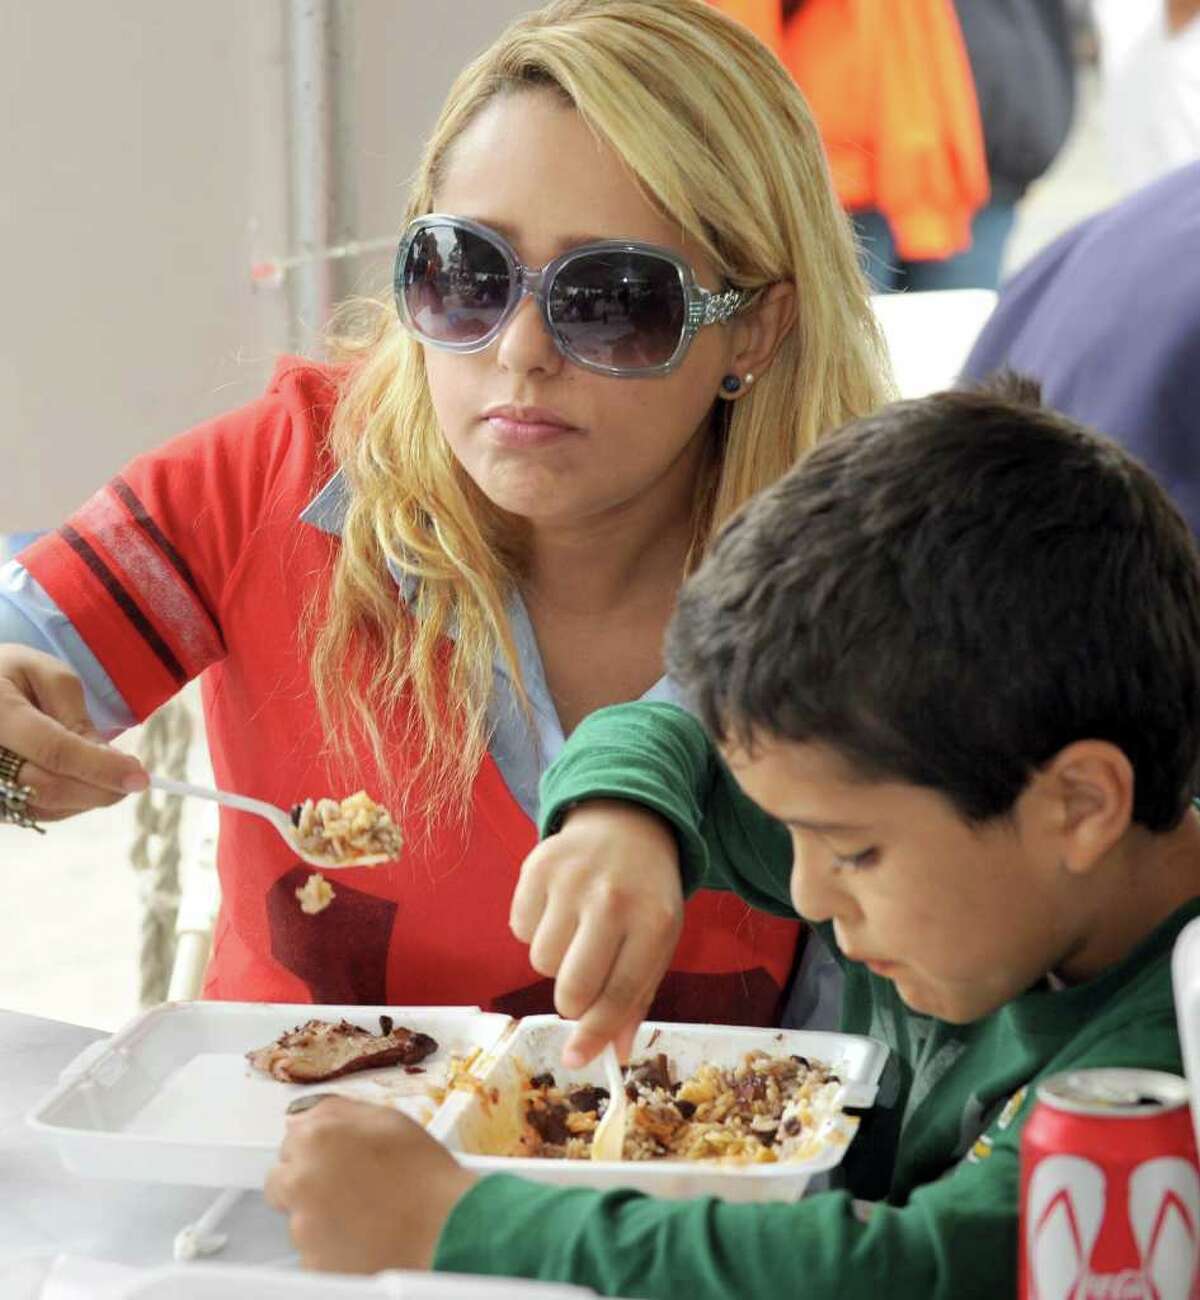 Roberta Maia of Danbury shares a Brazilian dish with her son Caleb, 8, at the Taste of Danbury Sunday, Sept. 12, 2010.